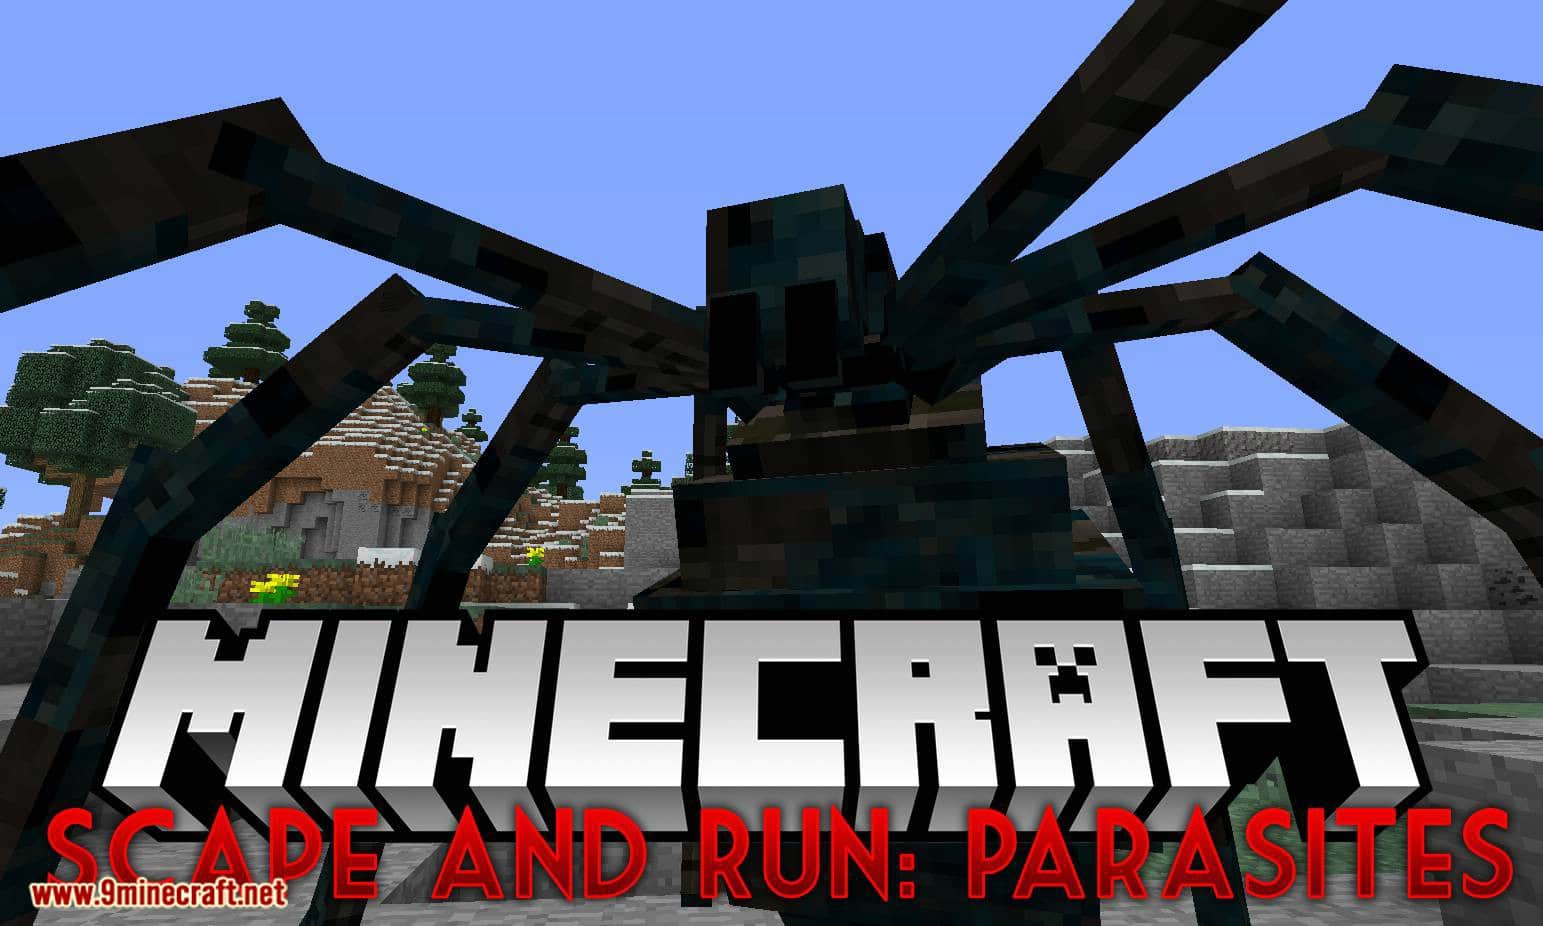 Scape-and-Run-Parasites-mod-for-minecraft-logo